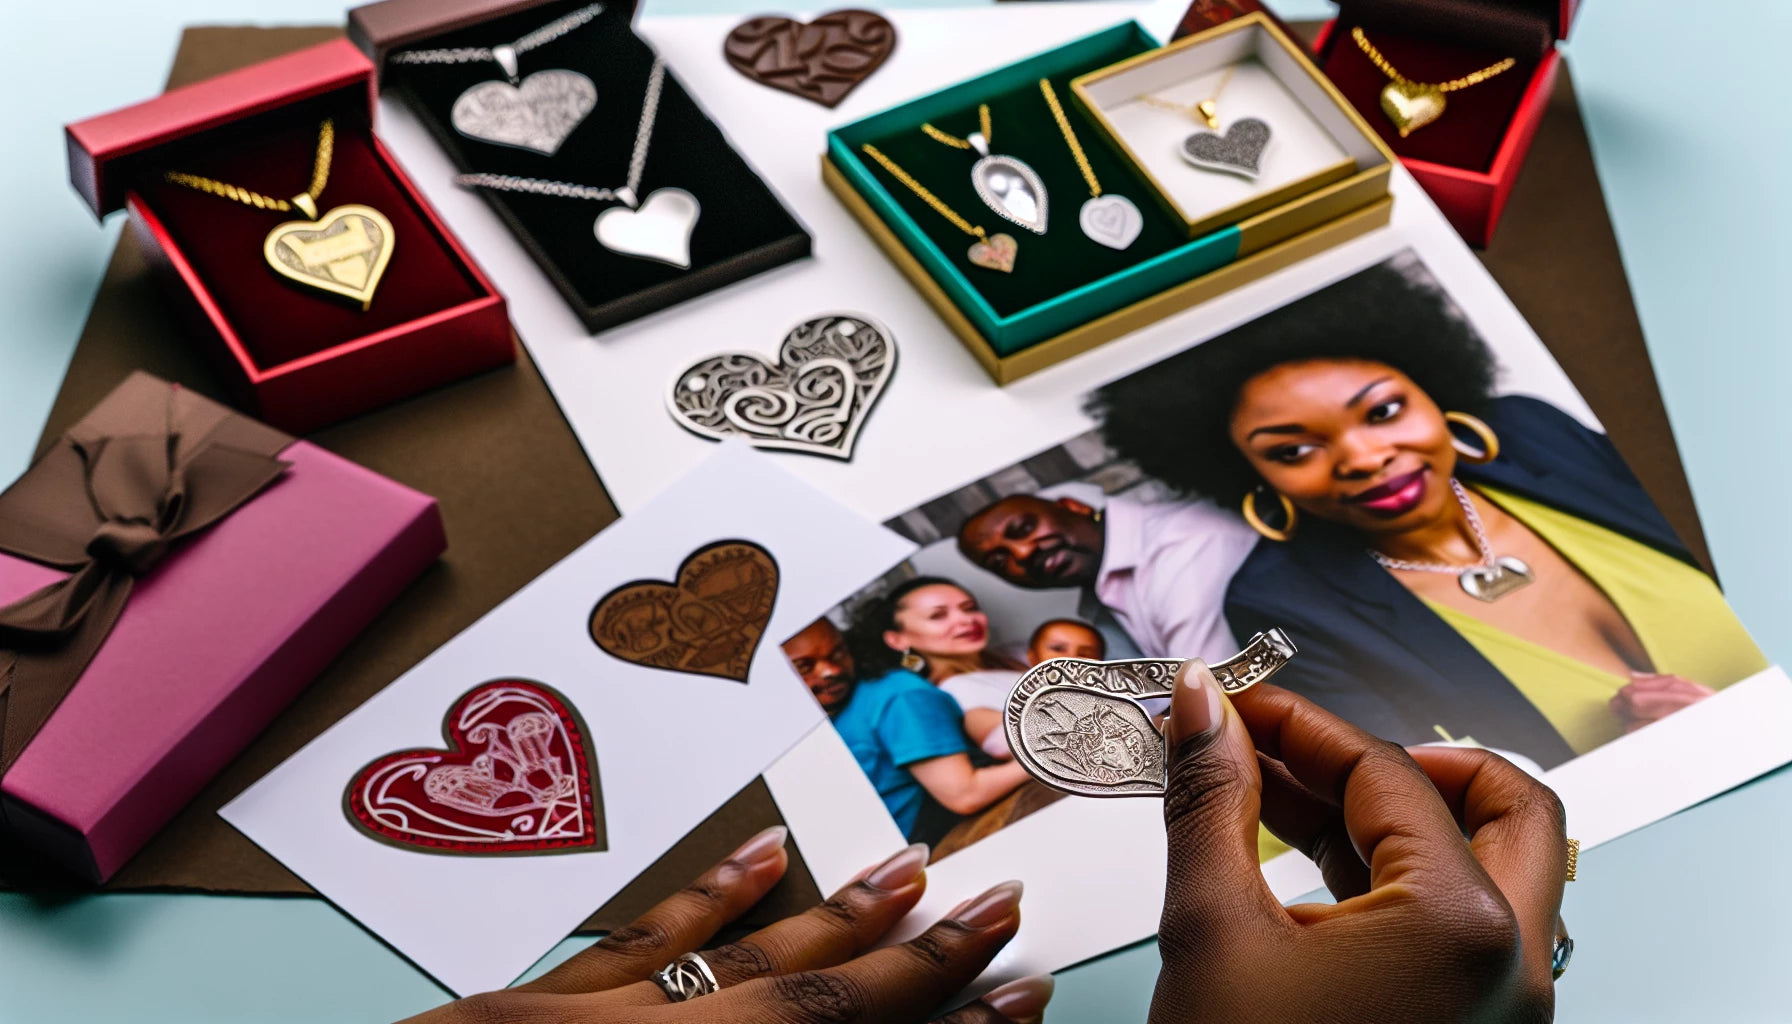 Personalized gifts displayed alongside a Valentine's Day card